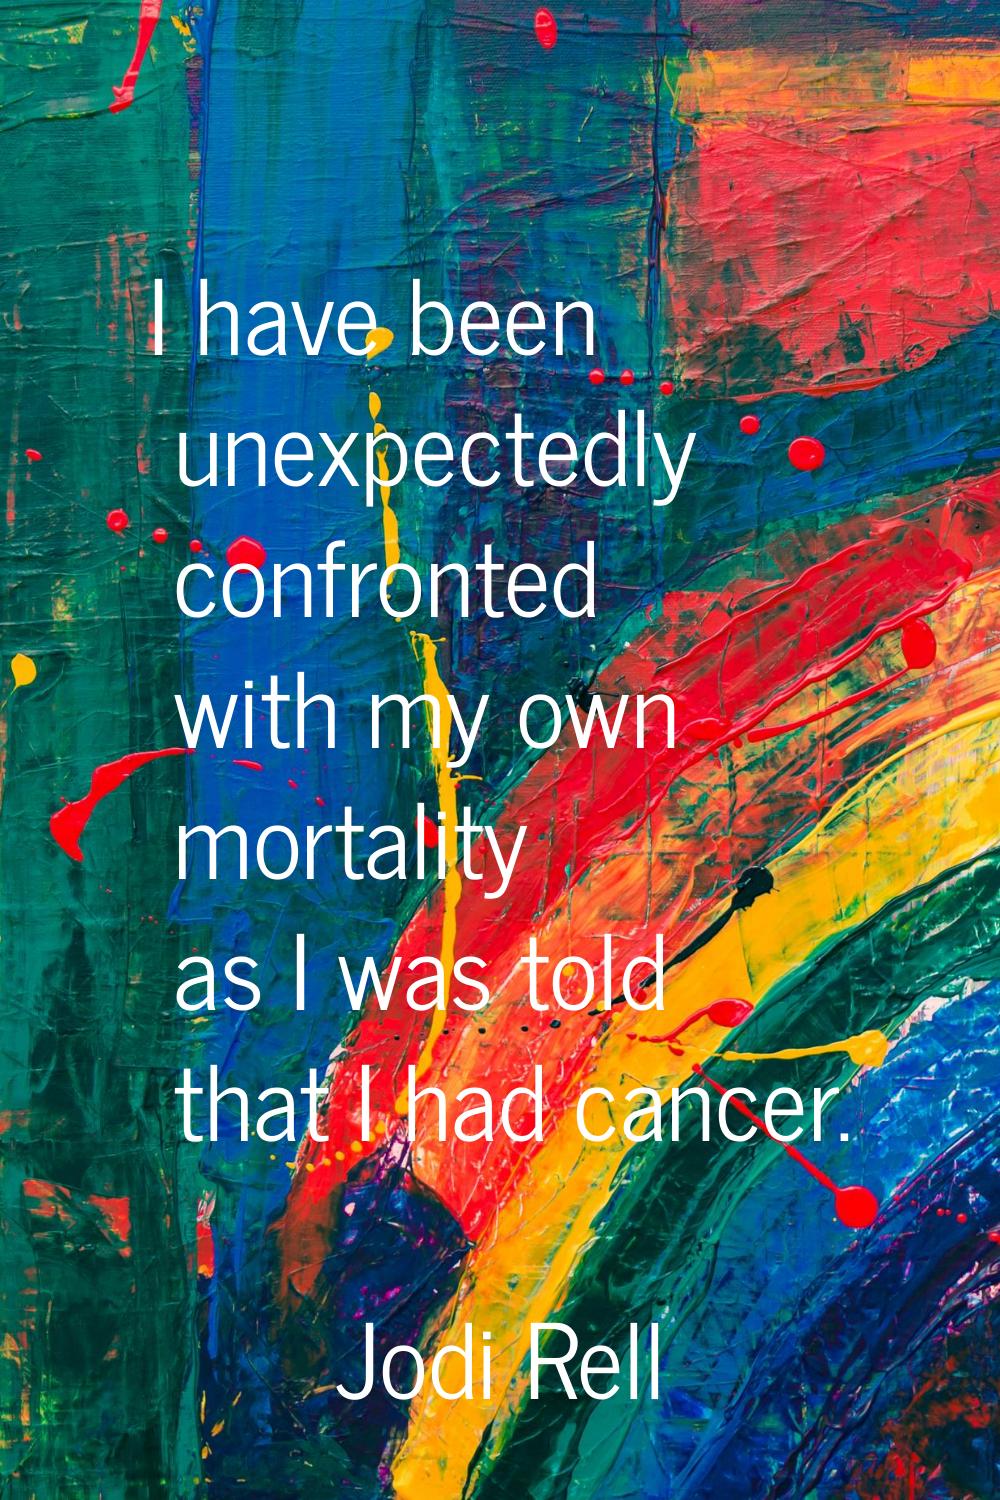 I have been unexpectedly confronted with my own mortality as I was told that I had cancer.